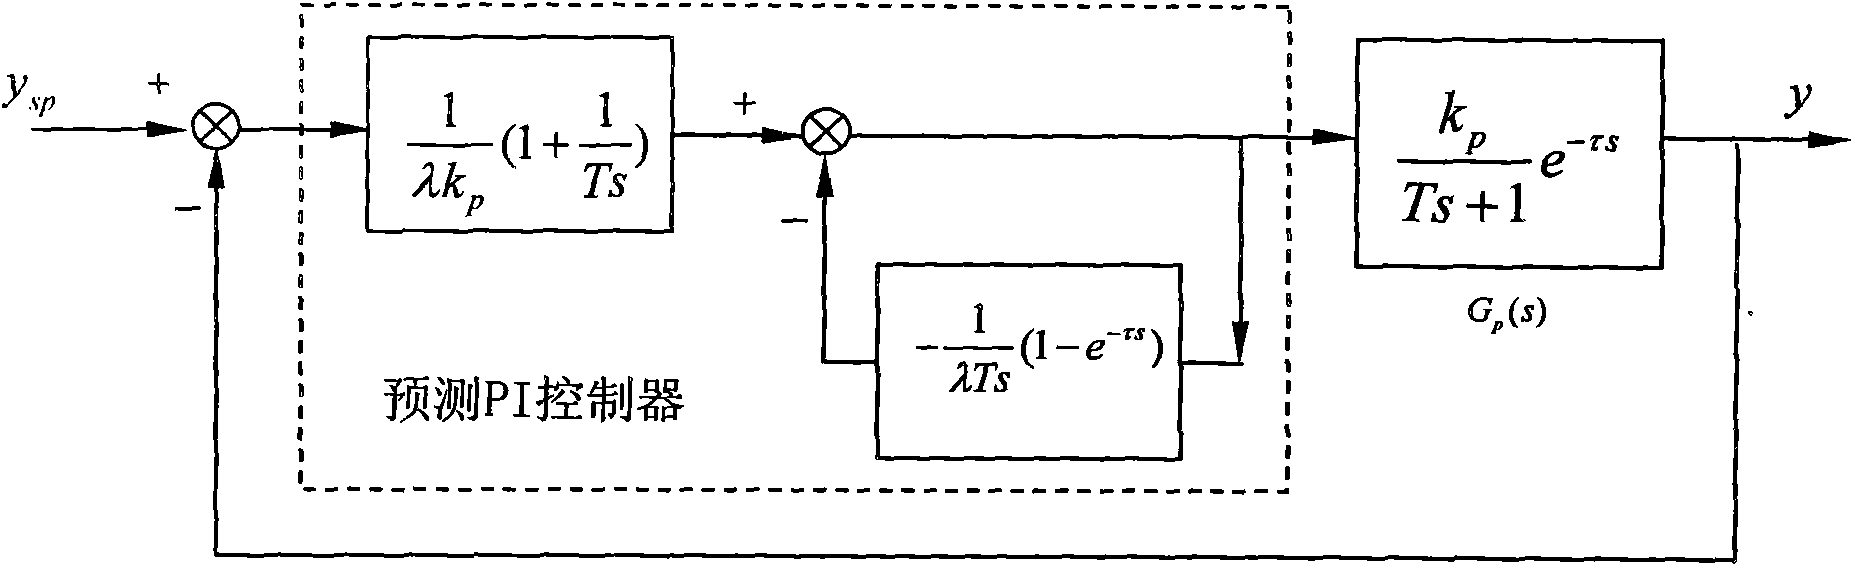 Control method applied to threshing and redrying production line